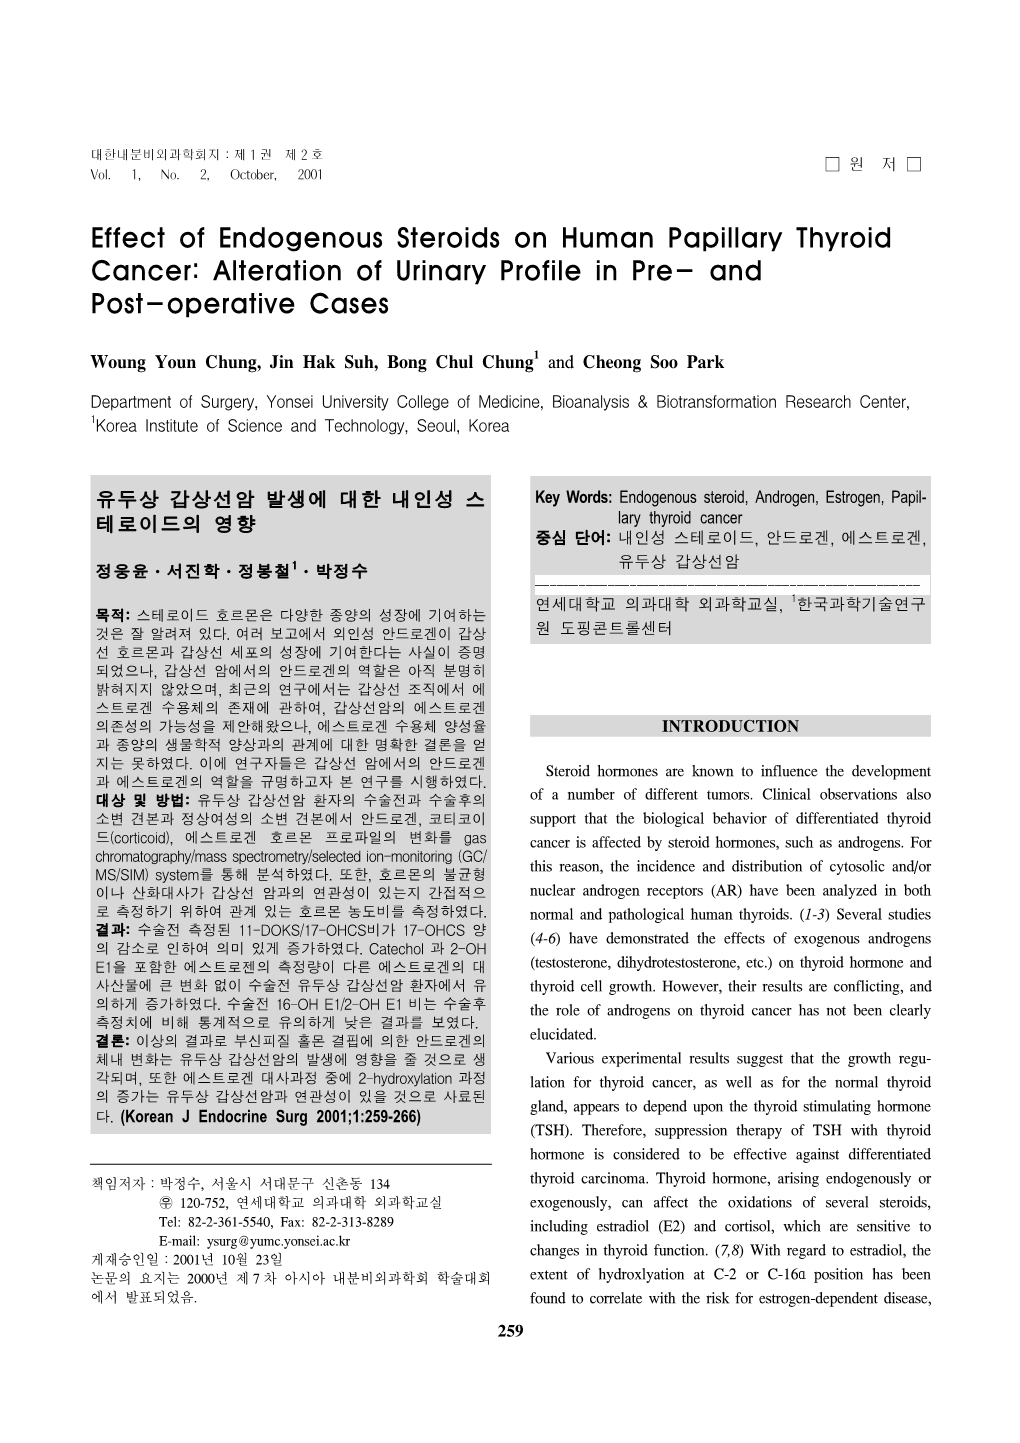 Effect of Endogenous Steroids on Human Papillary Thyroid Cancer: Alteration of Urinary Profile in Pre- and Post-Operative Cases